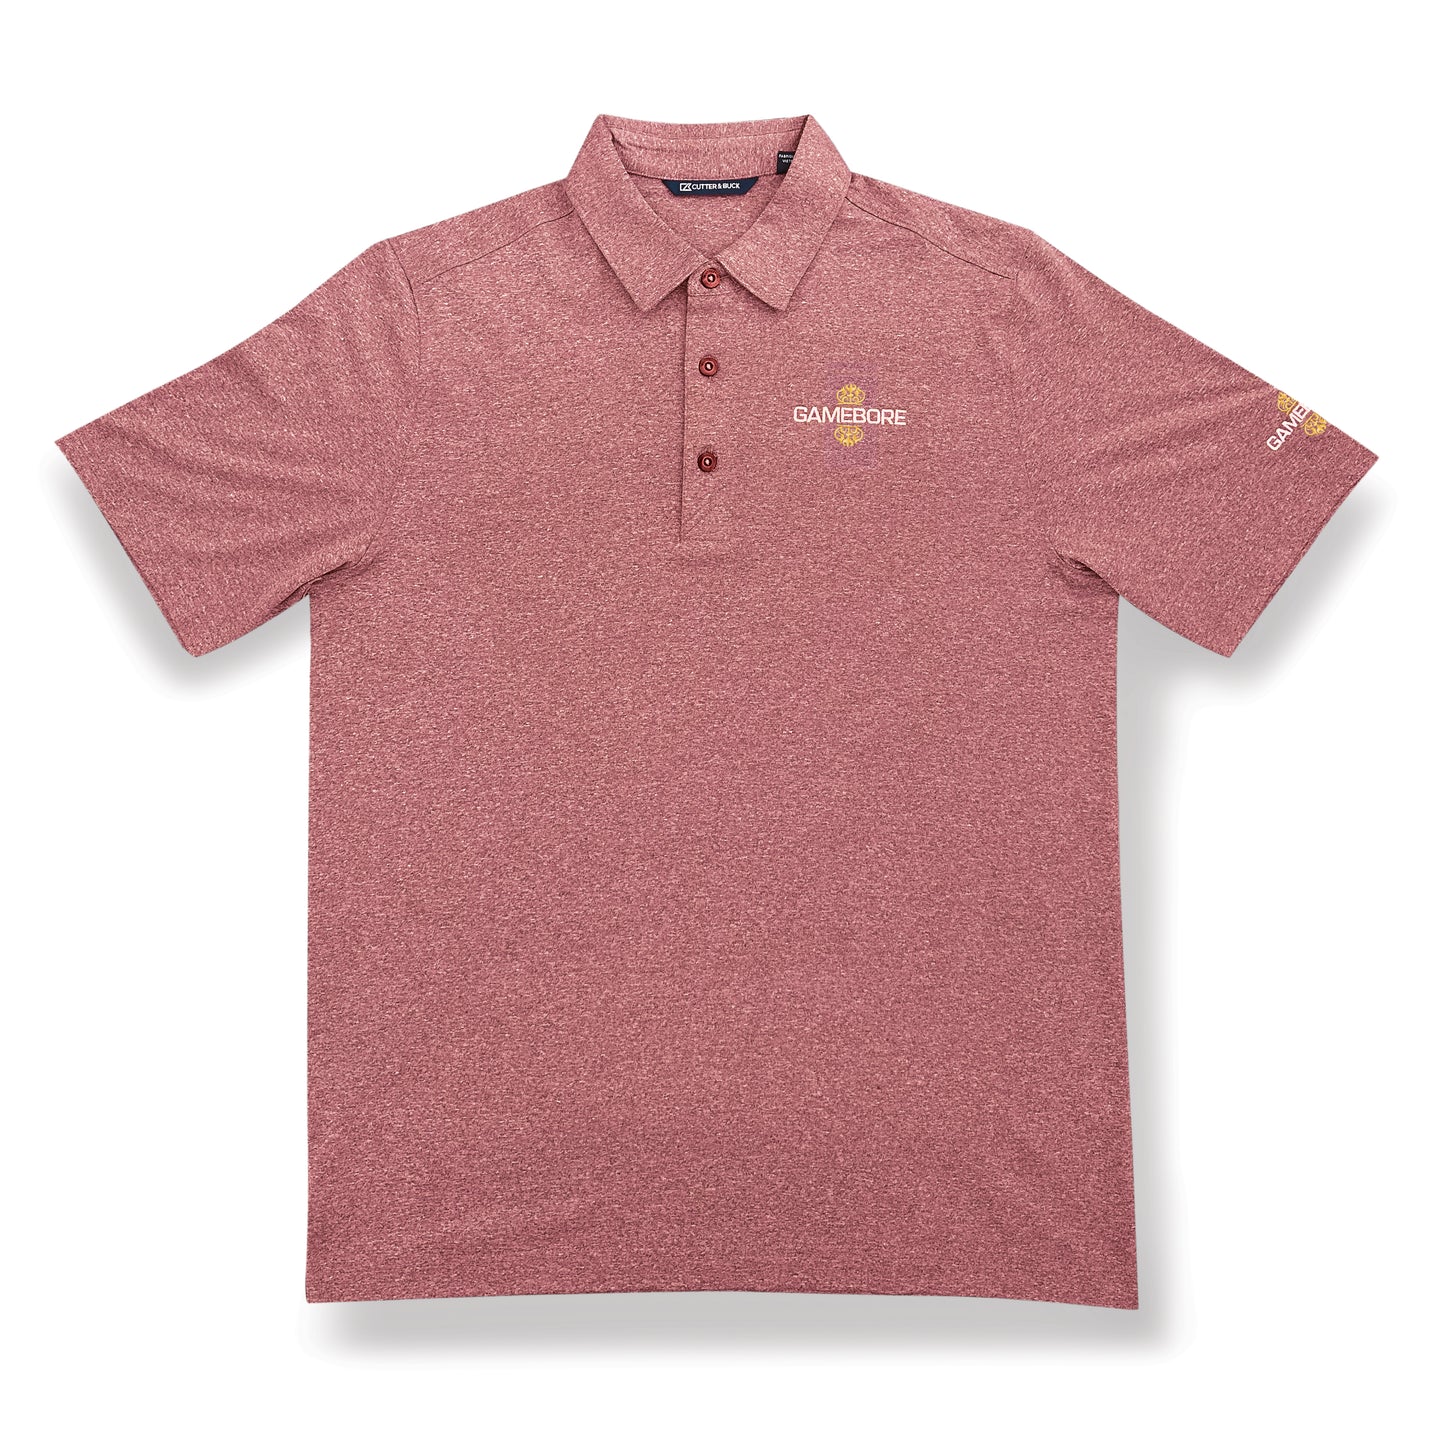 Cutter & Buck Forge Heathered Polo - Cardinal Red Heather